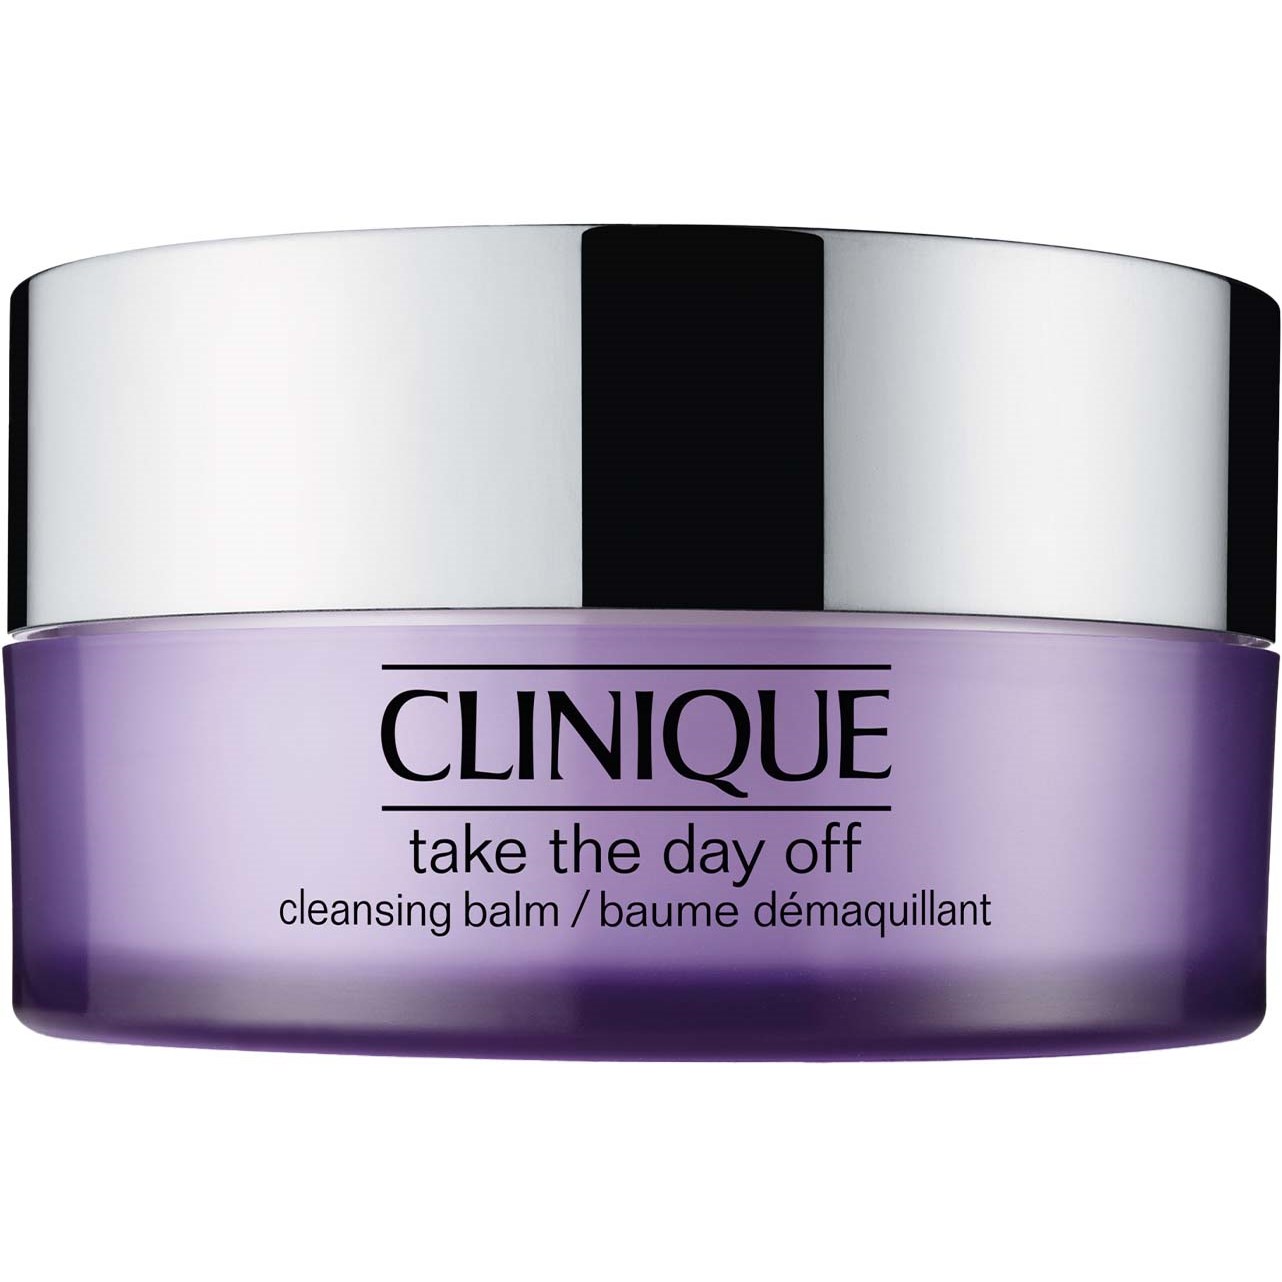 Bilde av Clinique Take The Day Off Cleansing Balm Makeup Remover 125 Ml